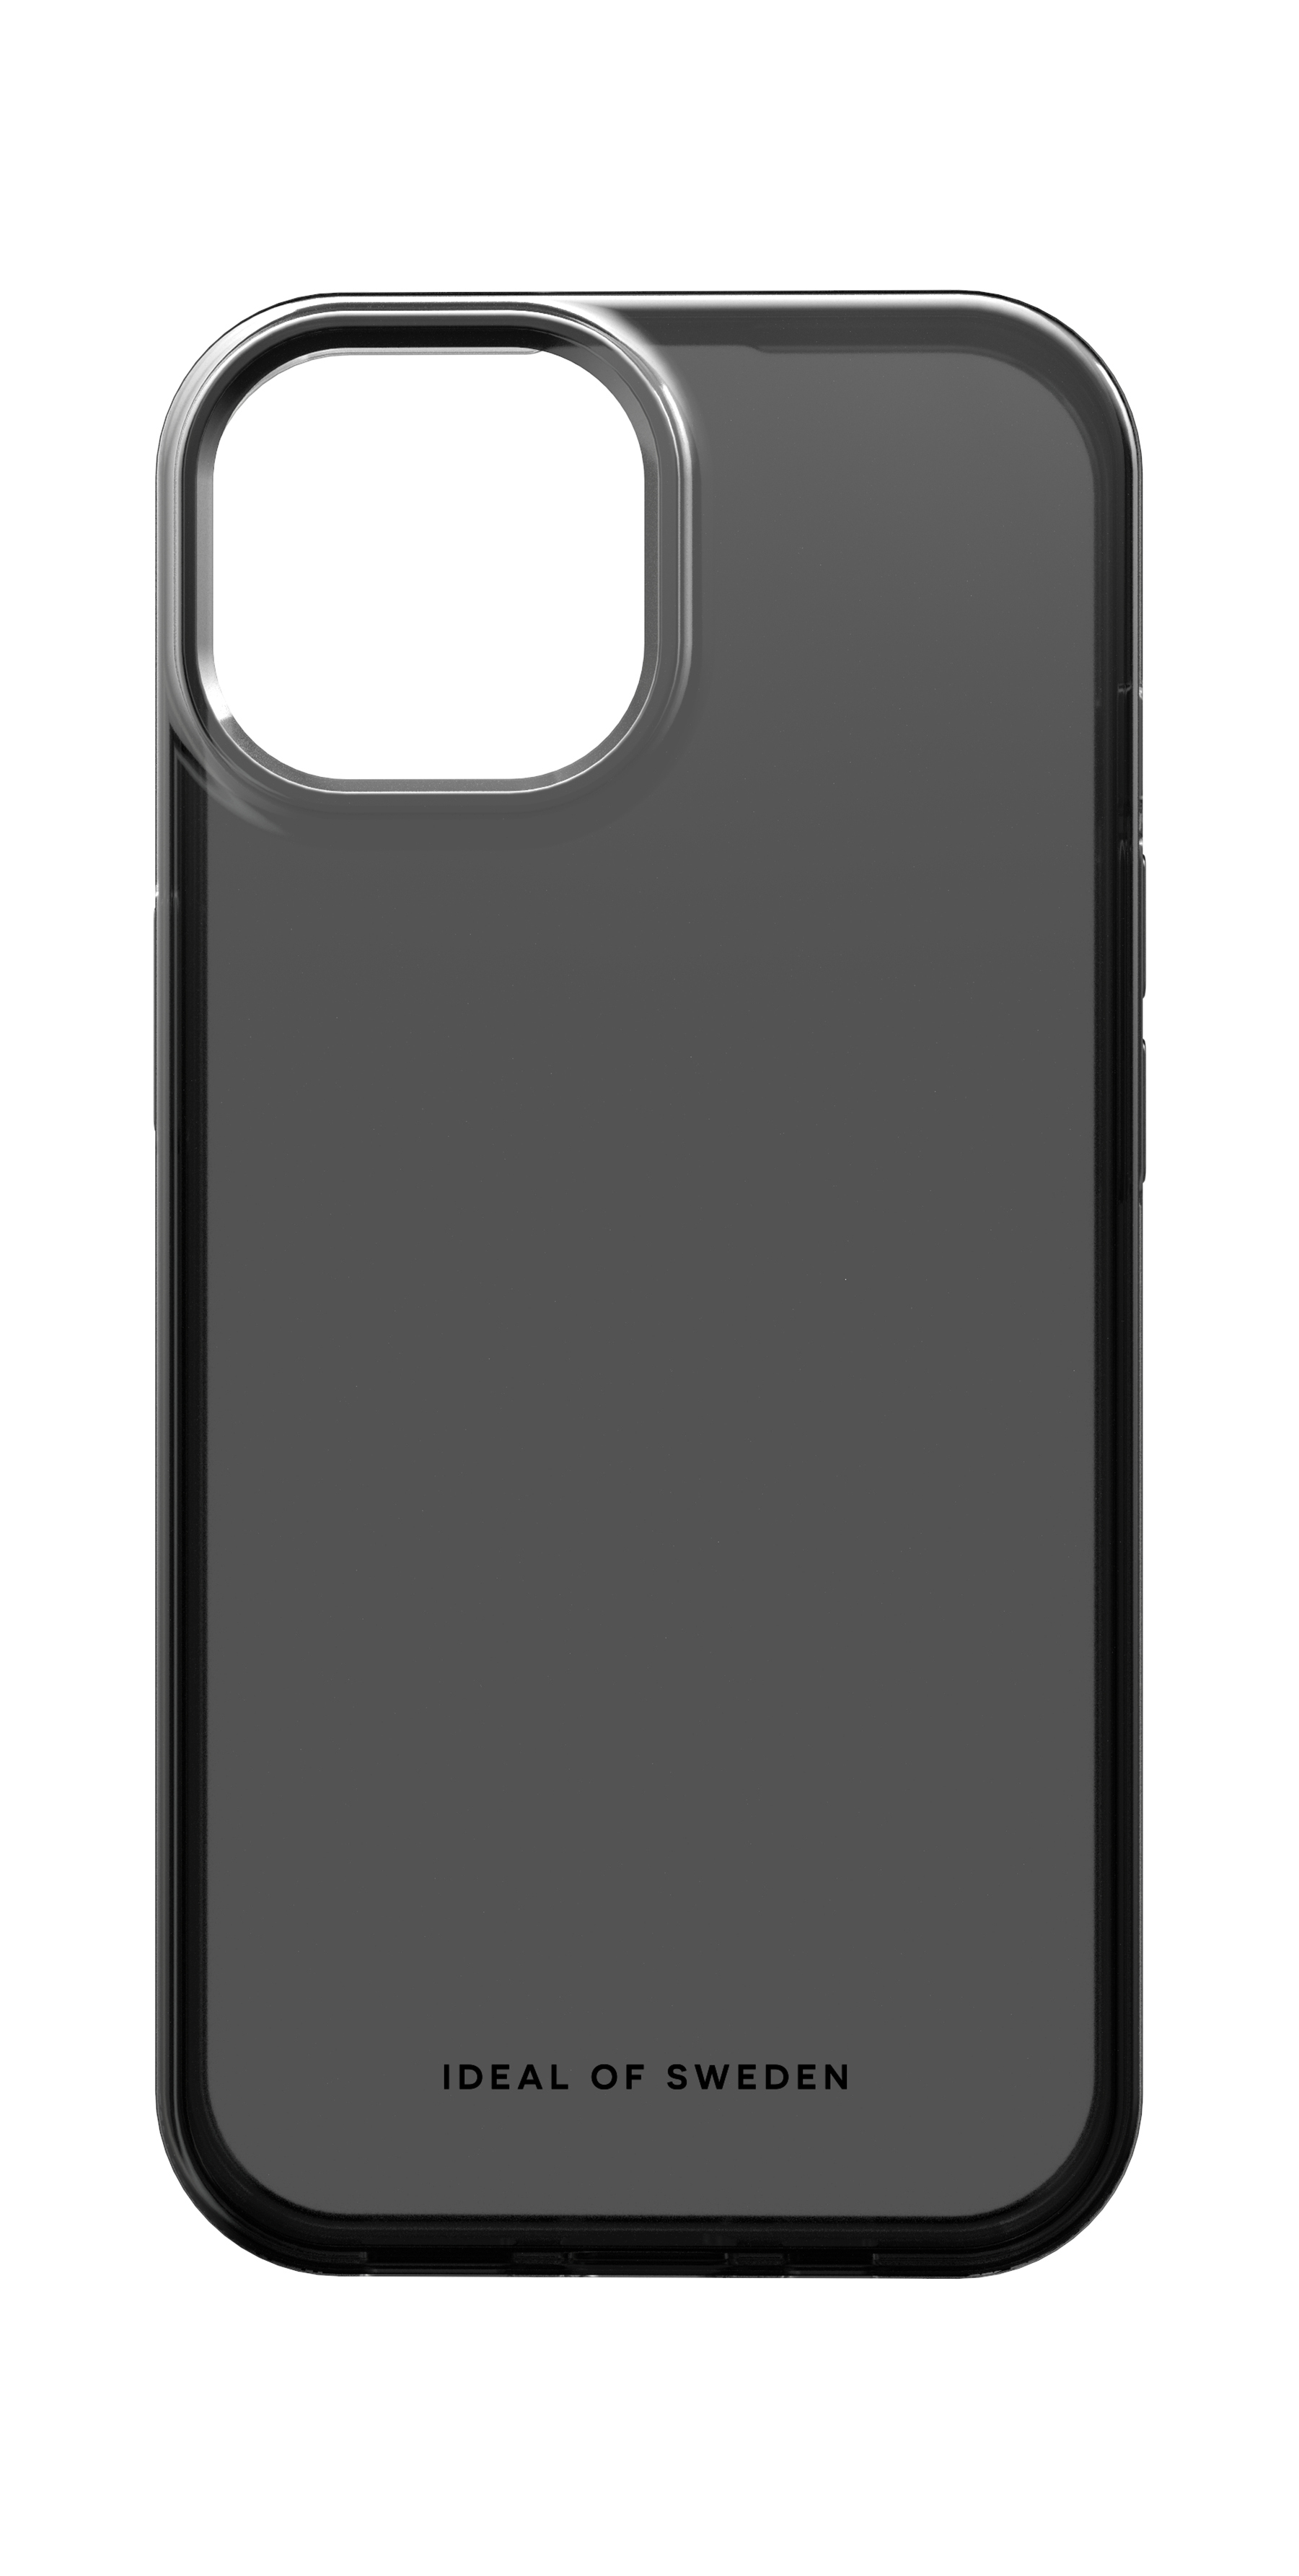 OF iPhone Backcover, 15, IDEAL Case, Clear Black SWEDEN Apple, Tinted